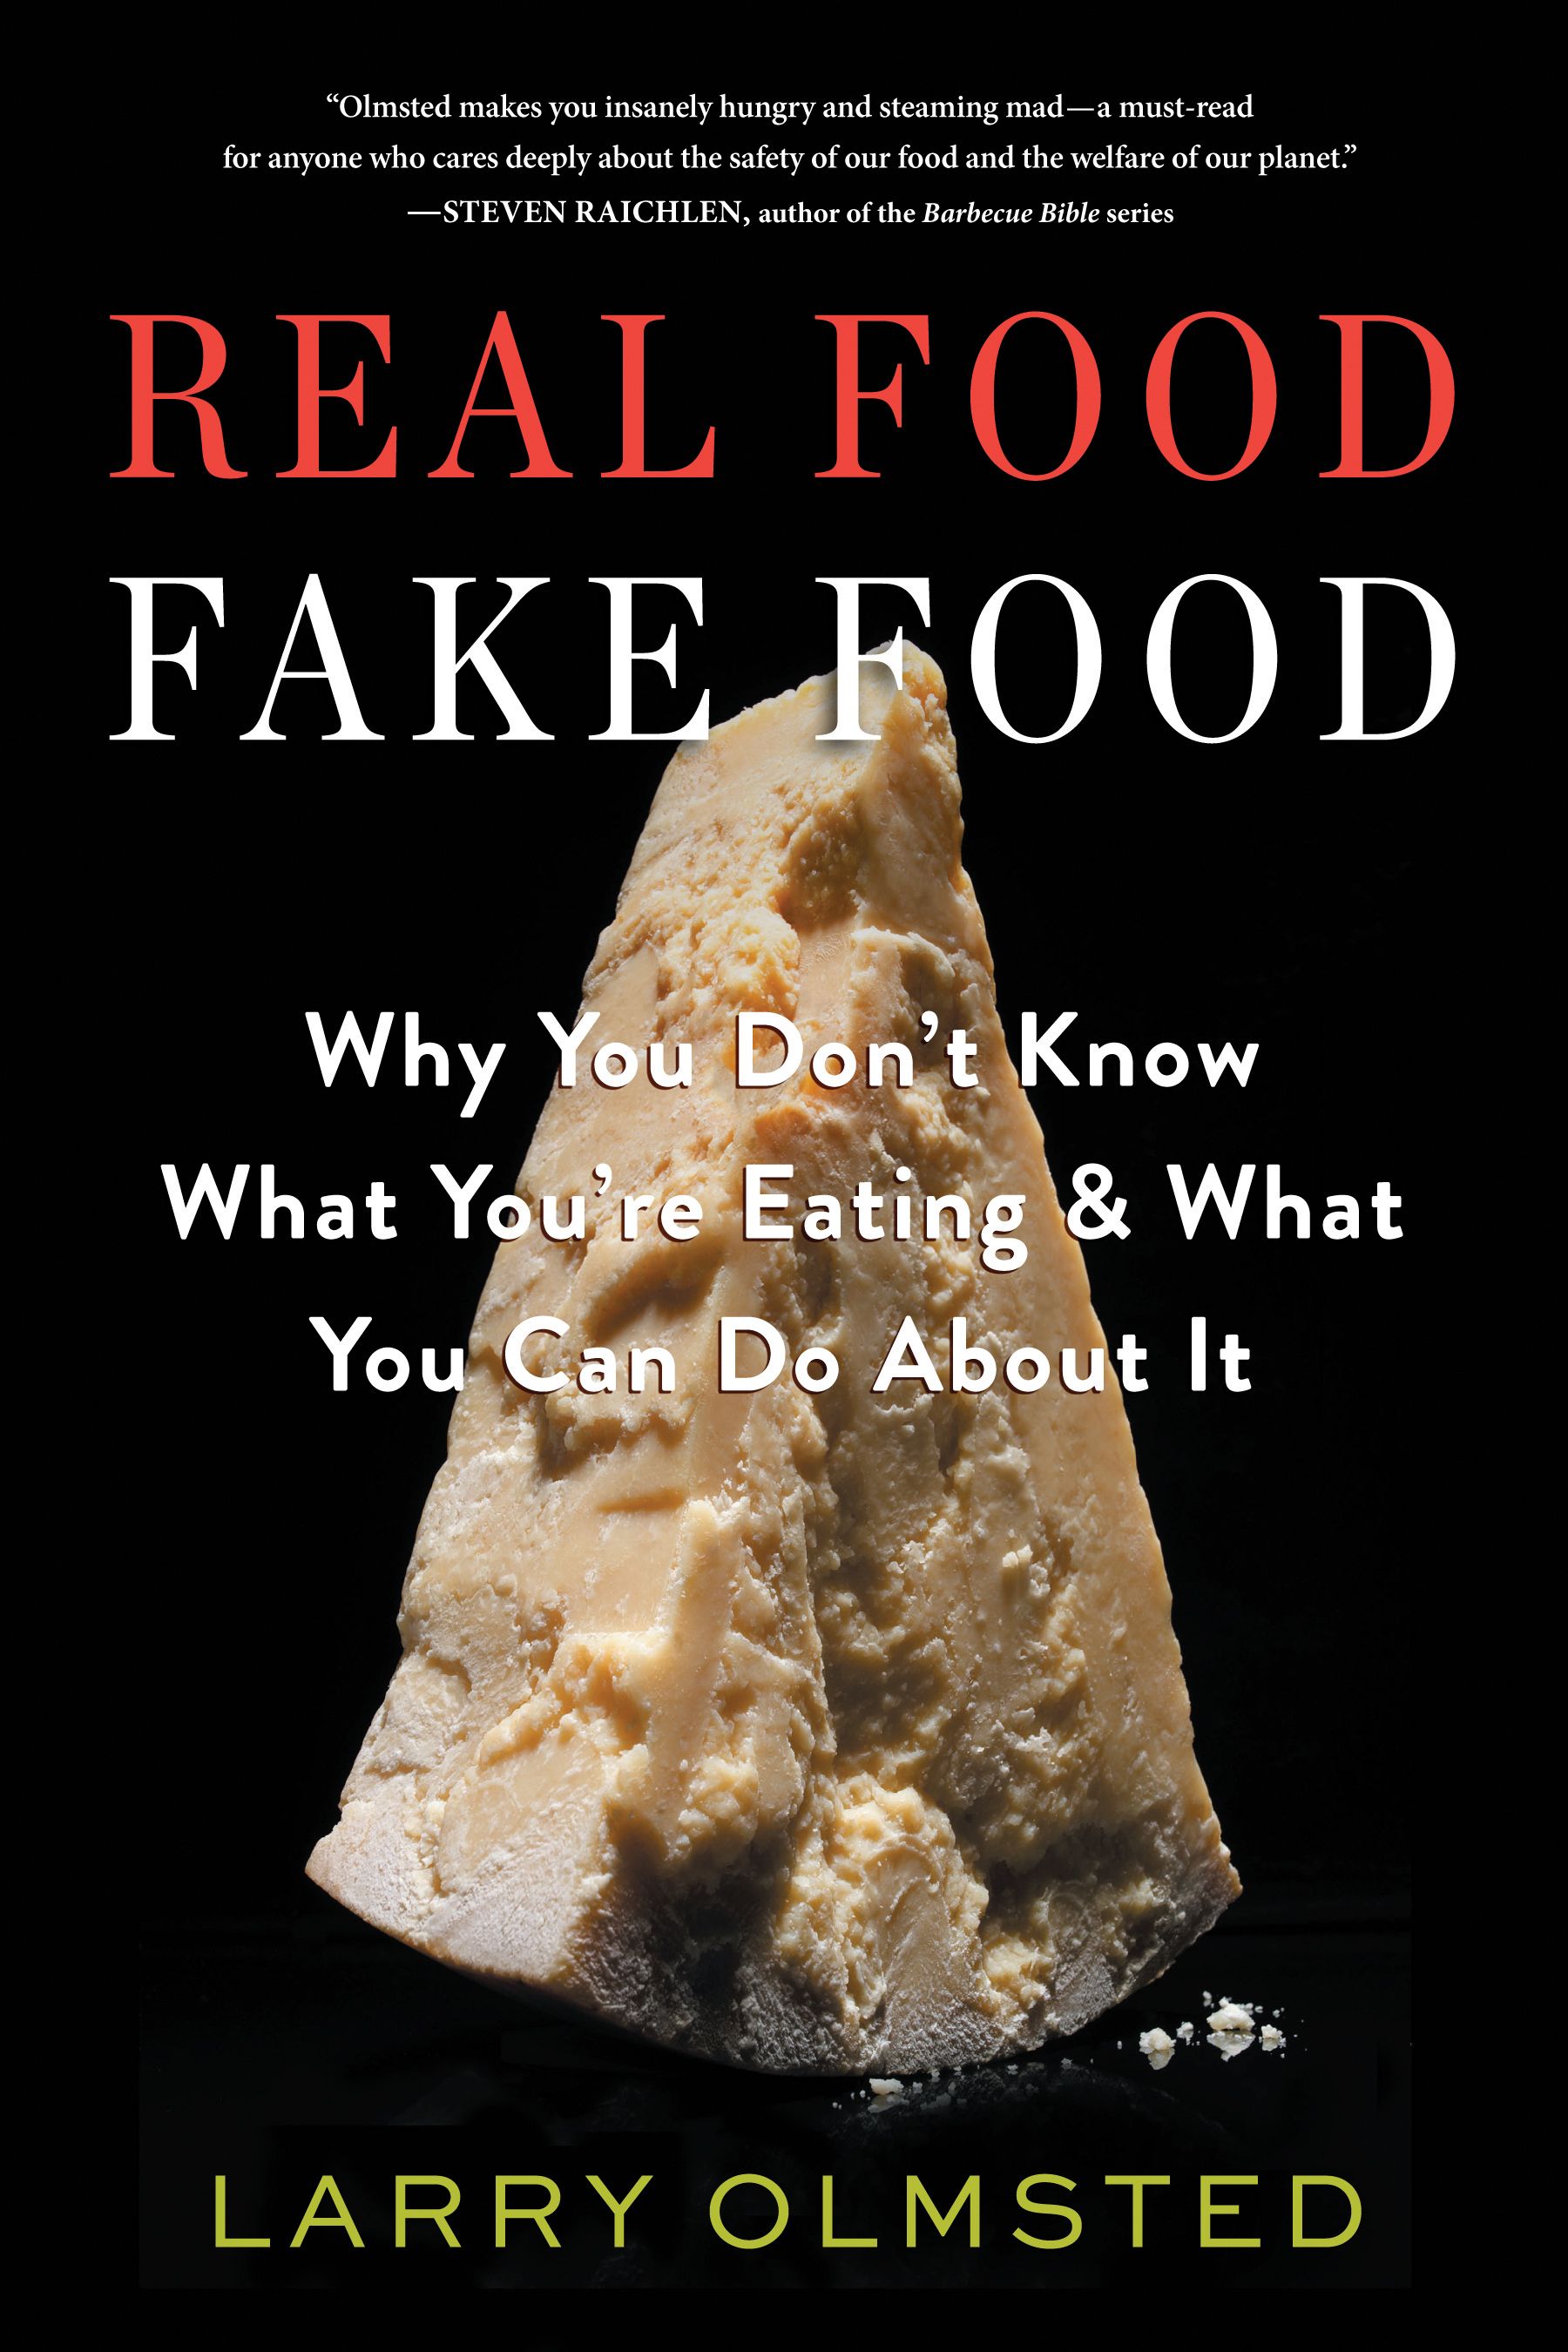 Fake food products and brands